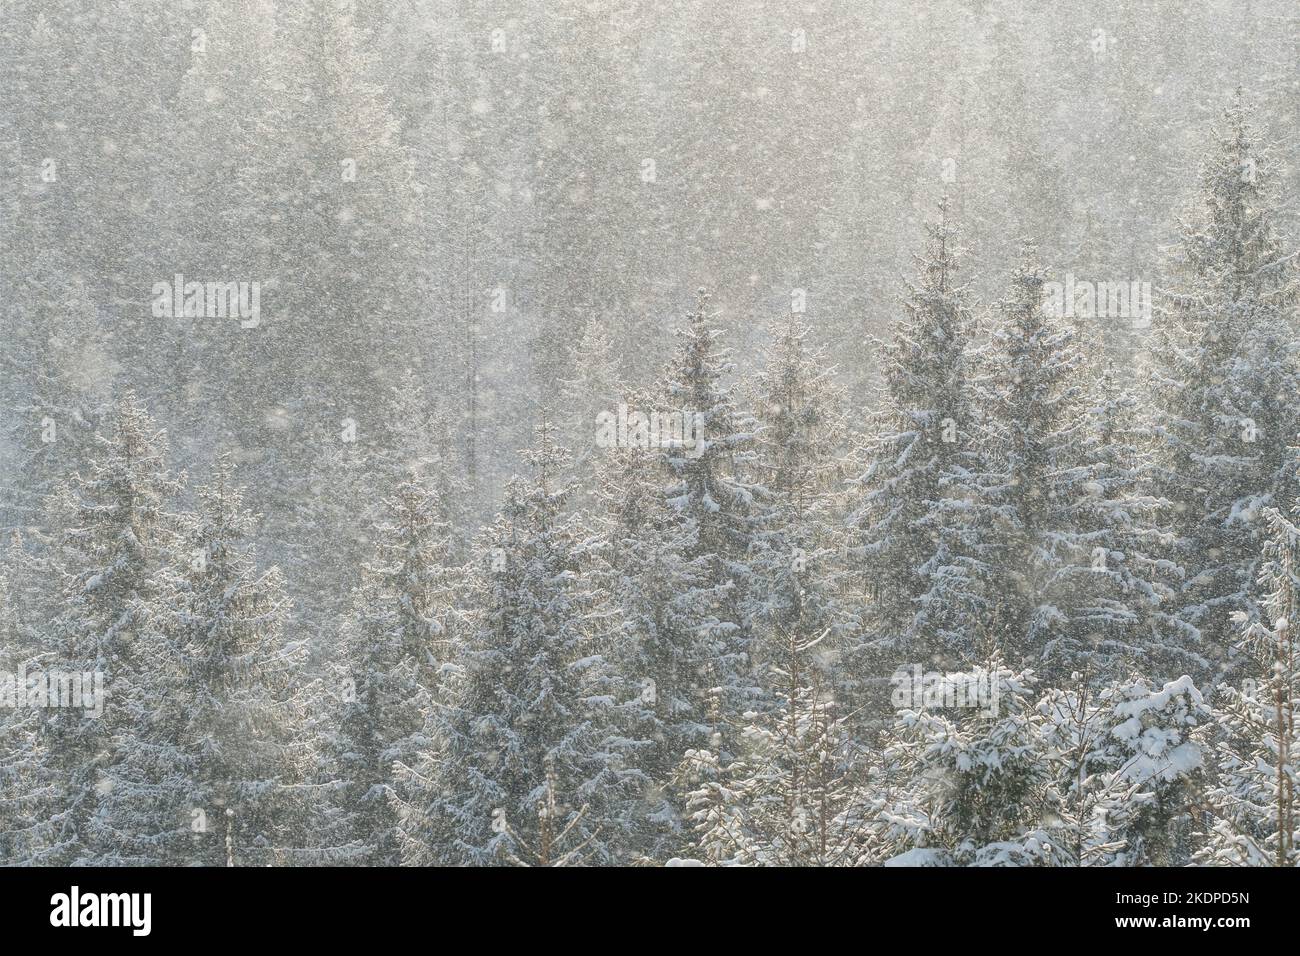 Beautiful winter scene with snow falling in fir-trees forest Stock Photo